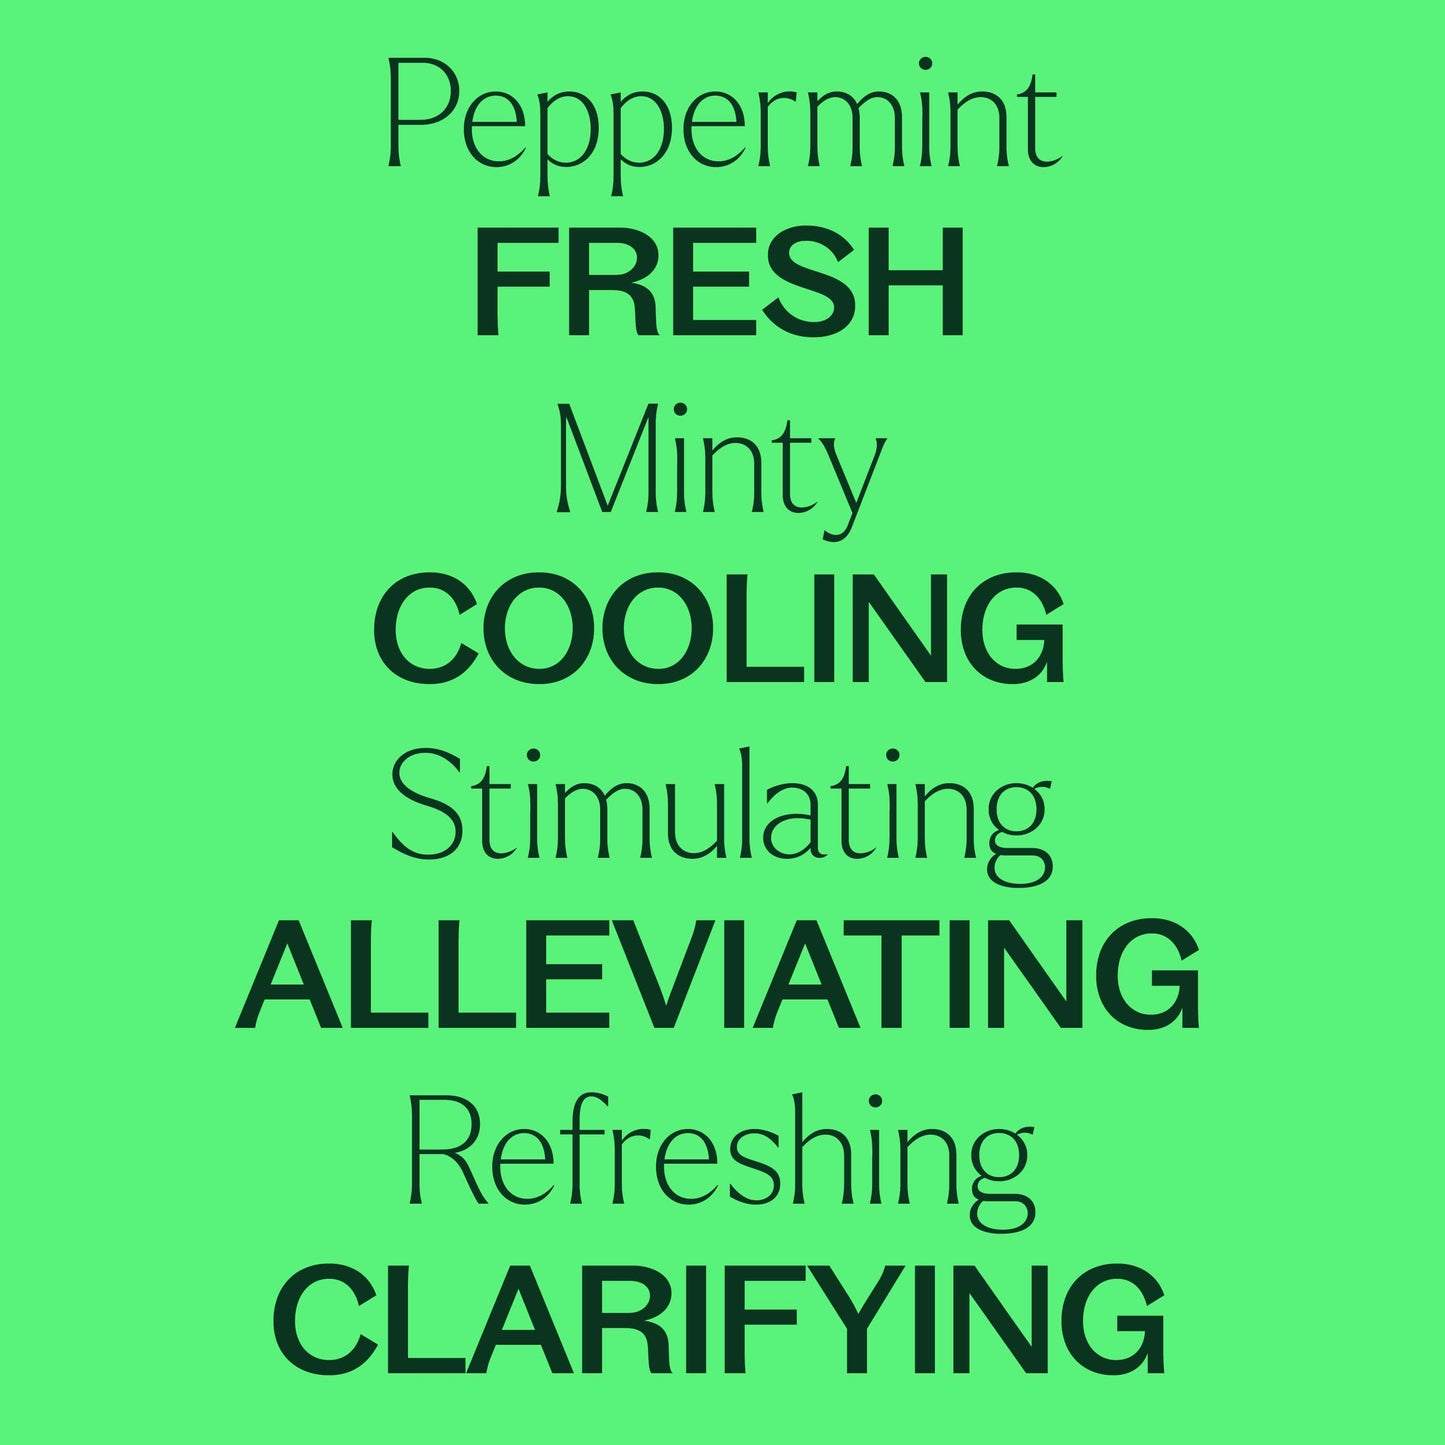 Organic Peppermint Essential Oil Pre-Diluted Roll-On is fresh, minty, cooling, stimulating, alleviating, refreshing, clarifying